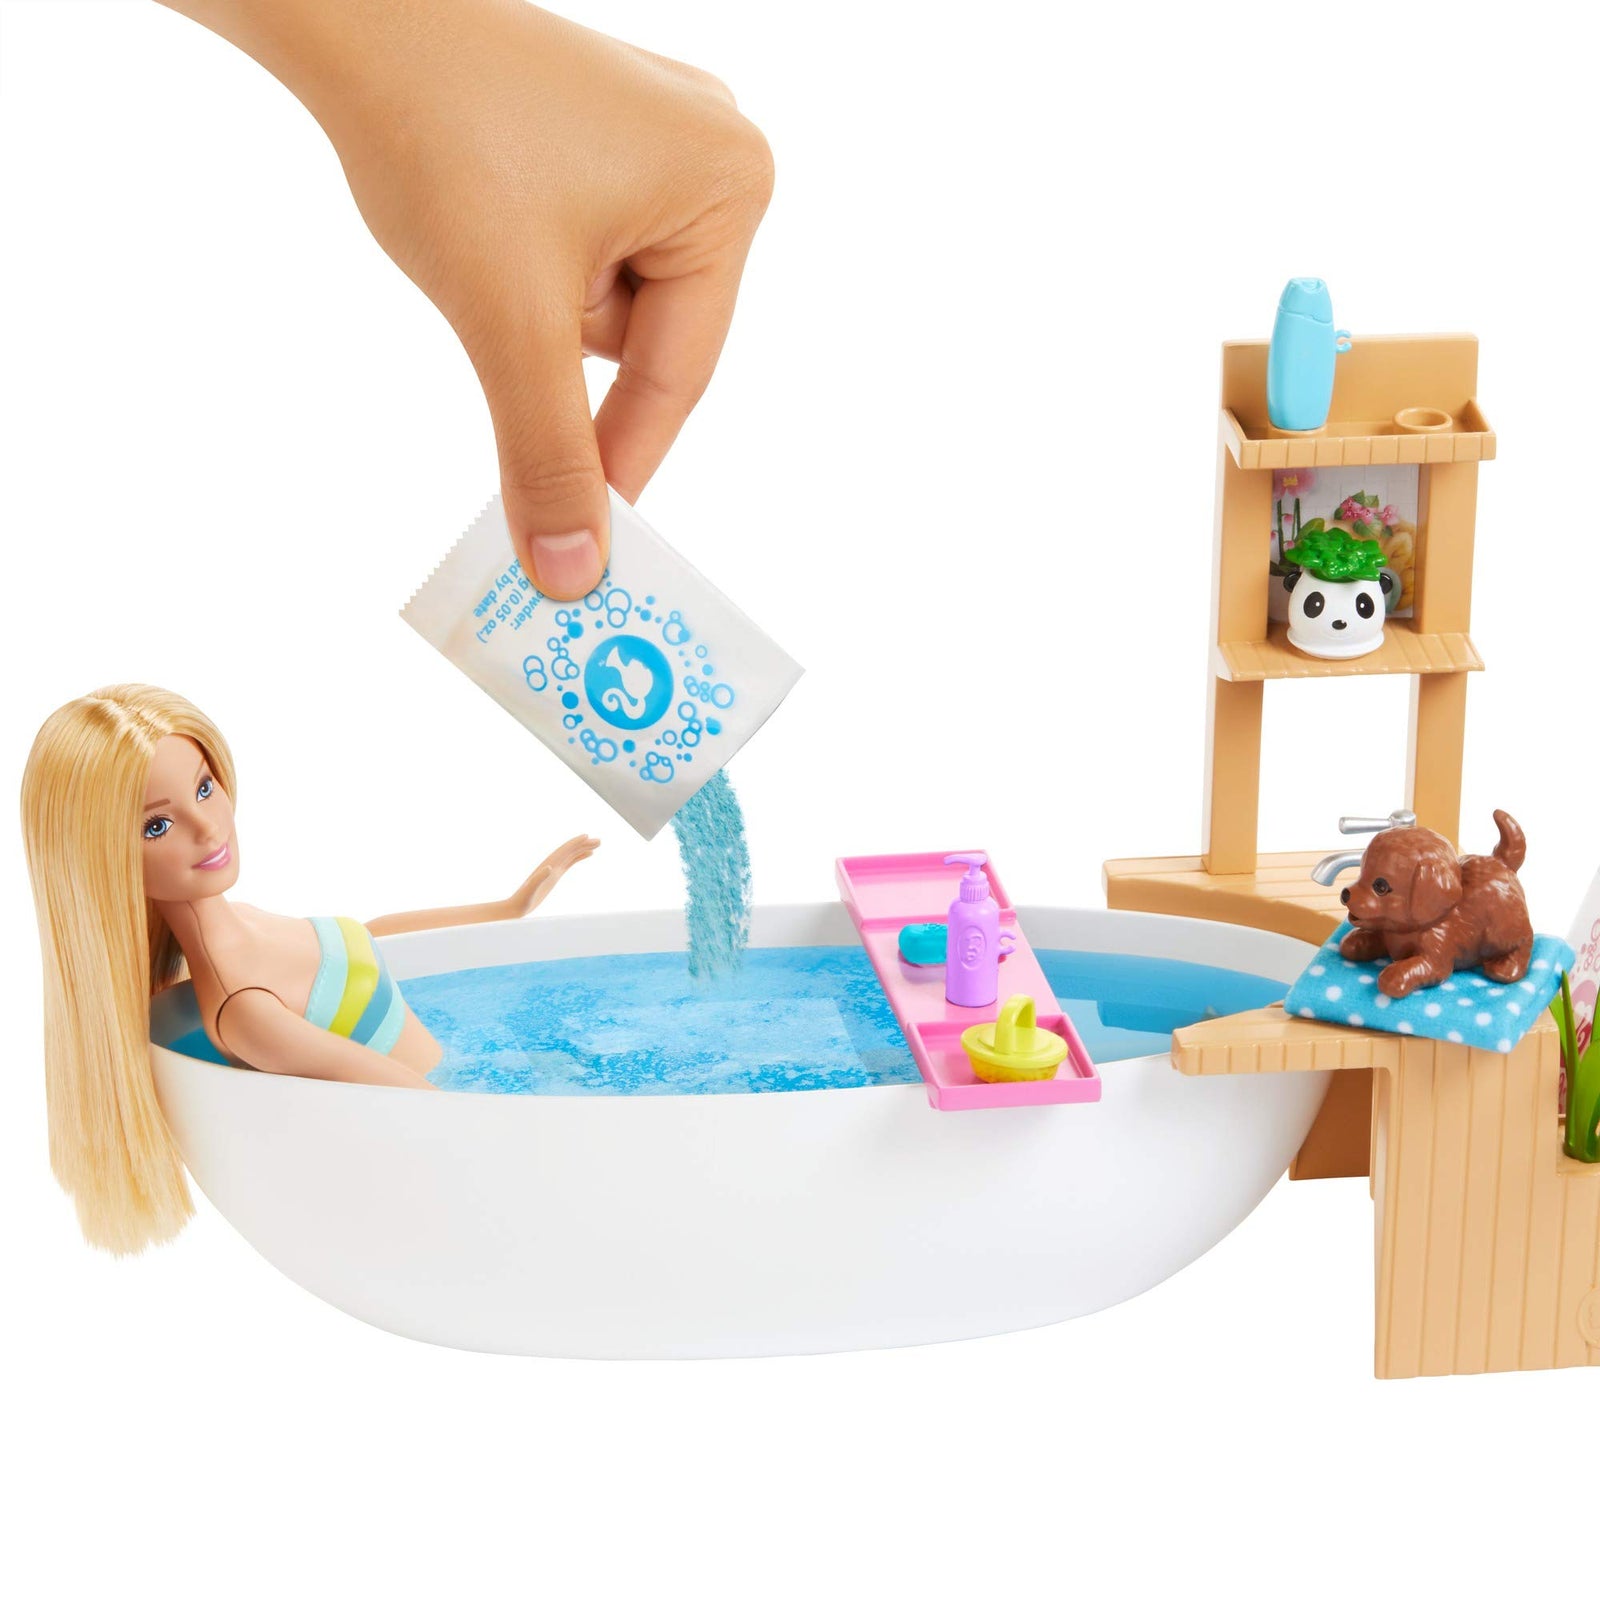 Barbie Fizzy Bath Doll & Playset, Blonde, with Tub, Fizzy Powder, Puppy & More, Gift for Kids 3 to 7 Years Old